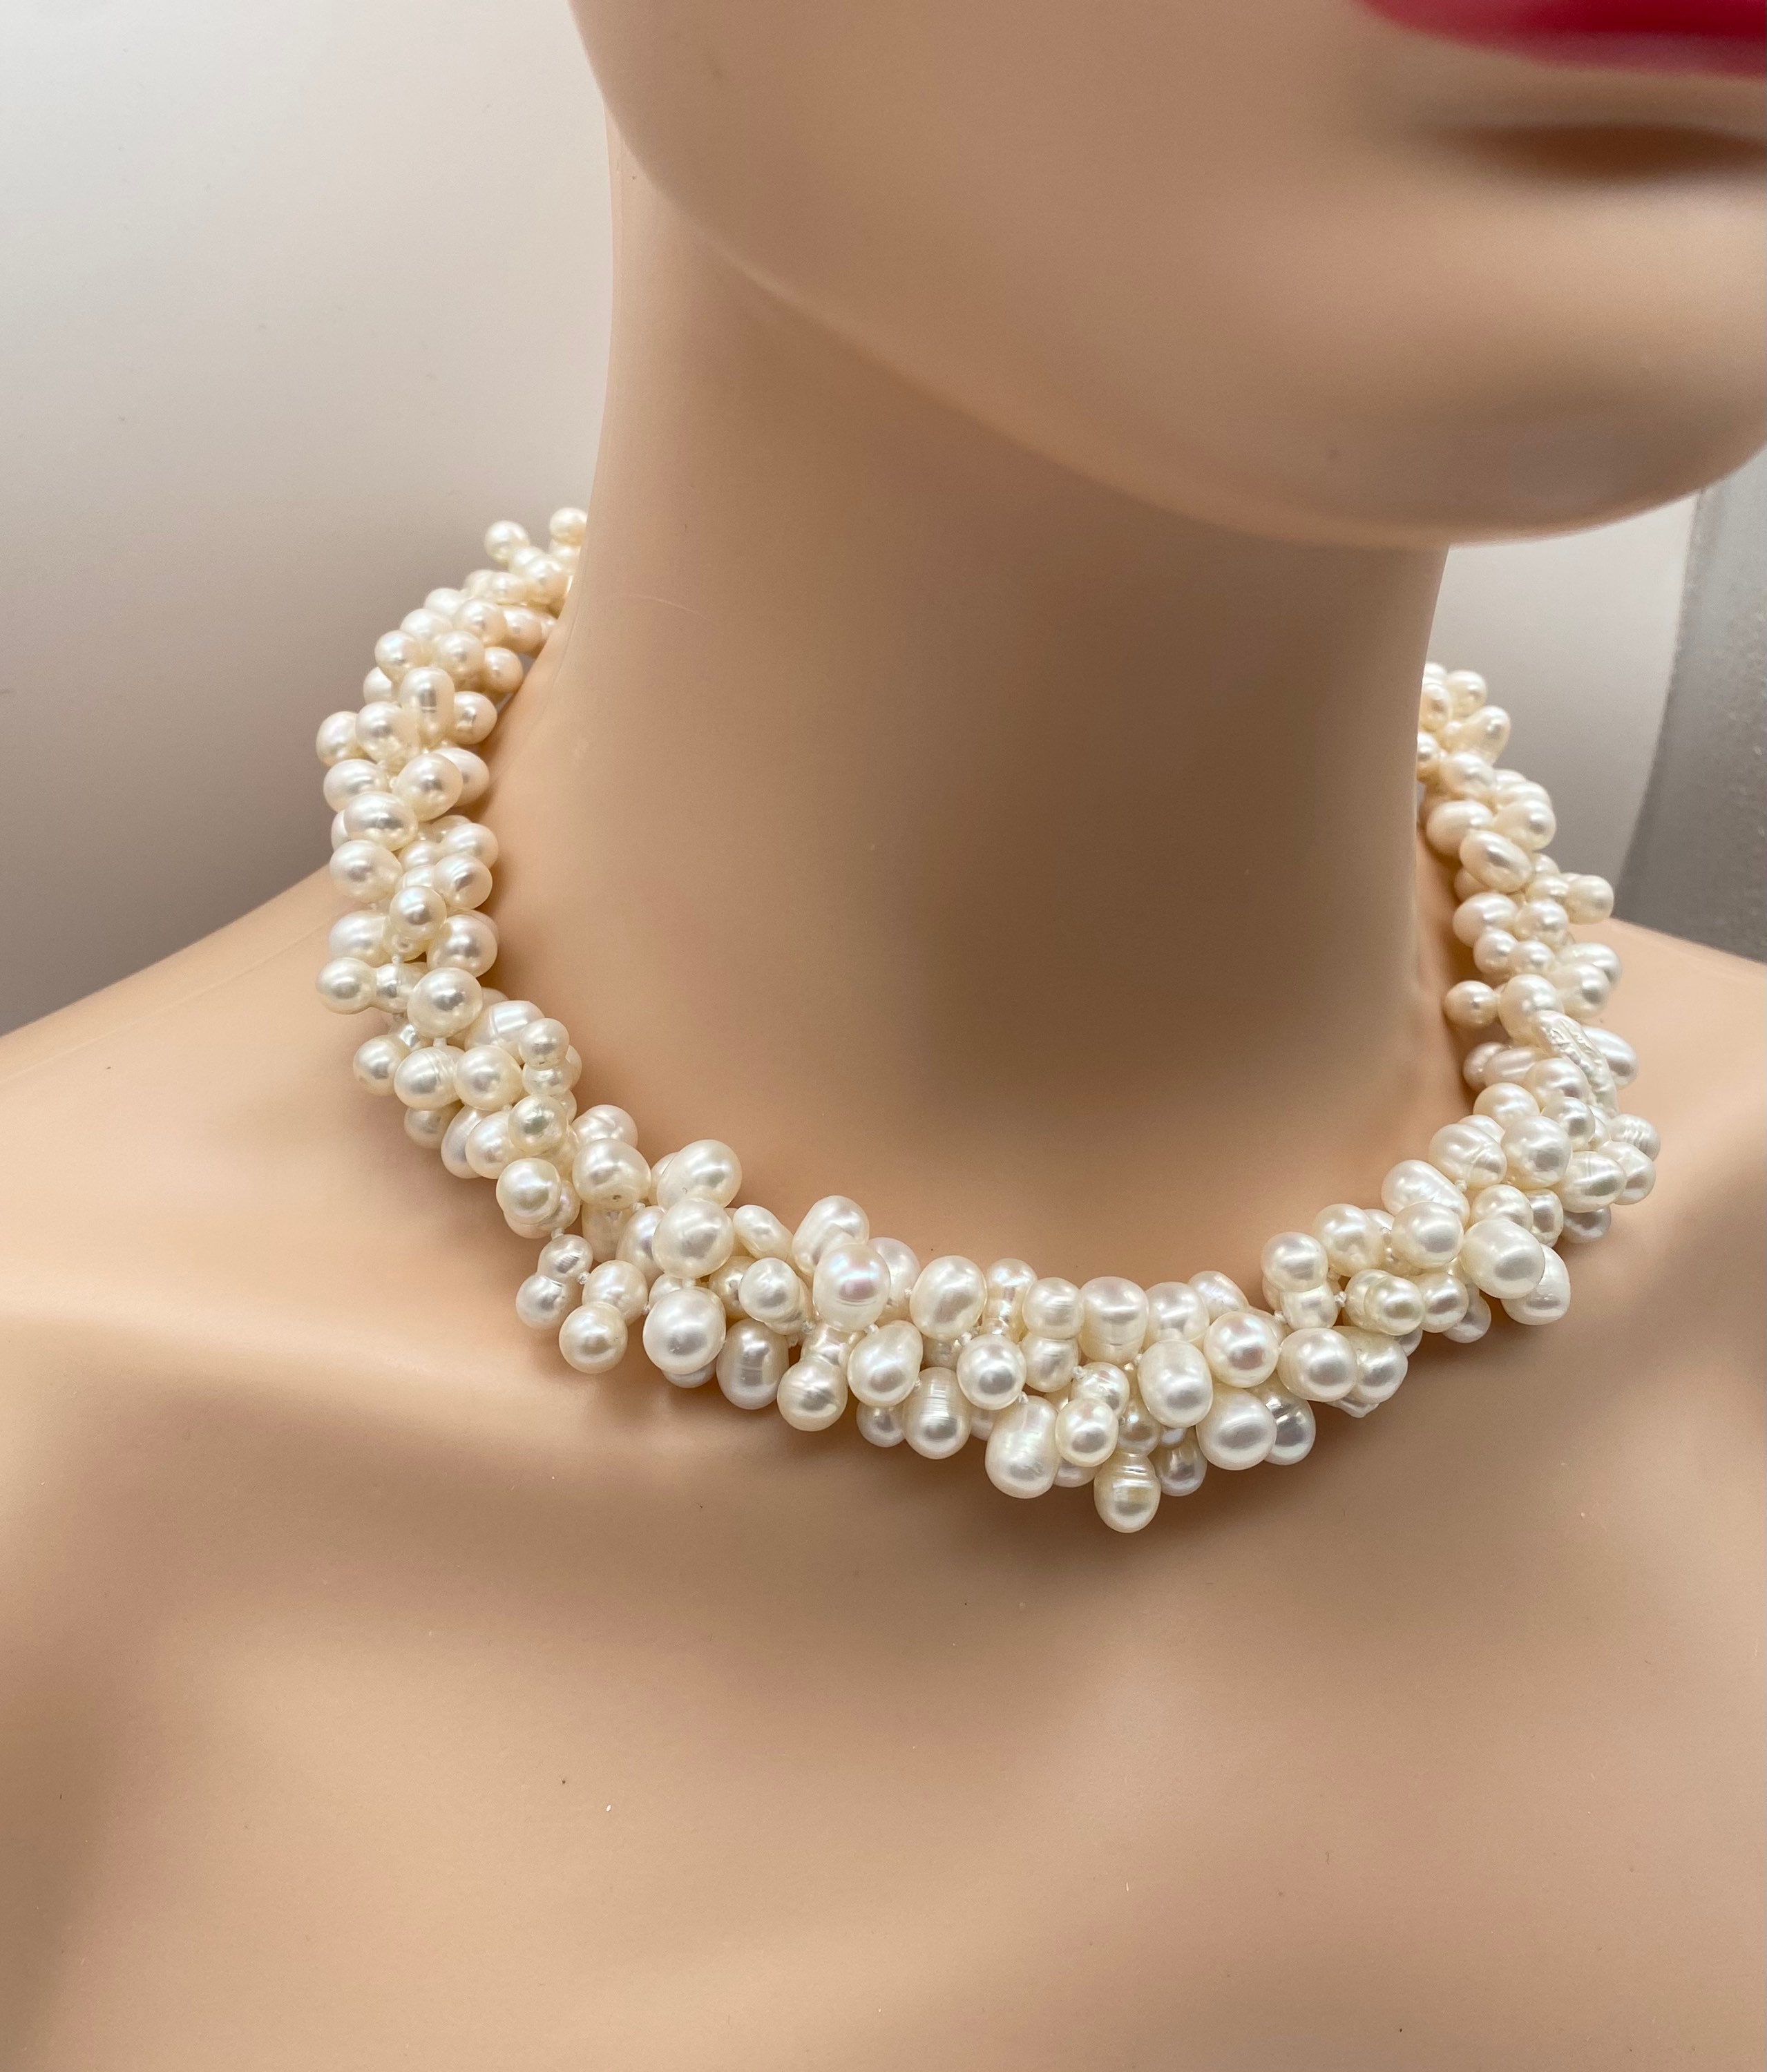 Lydell NYC Necklace White Clear Crystal Statement Jewelry | eBay